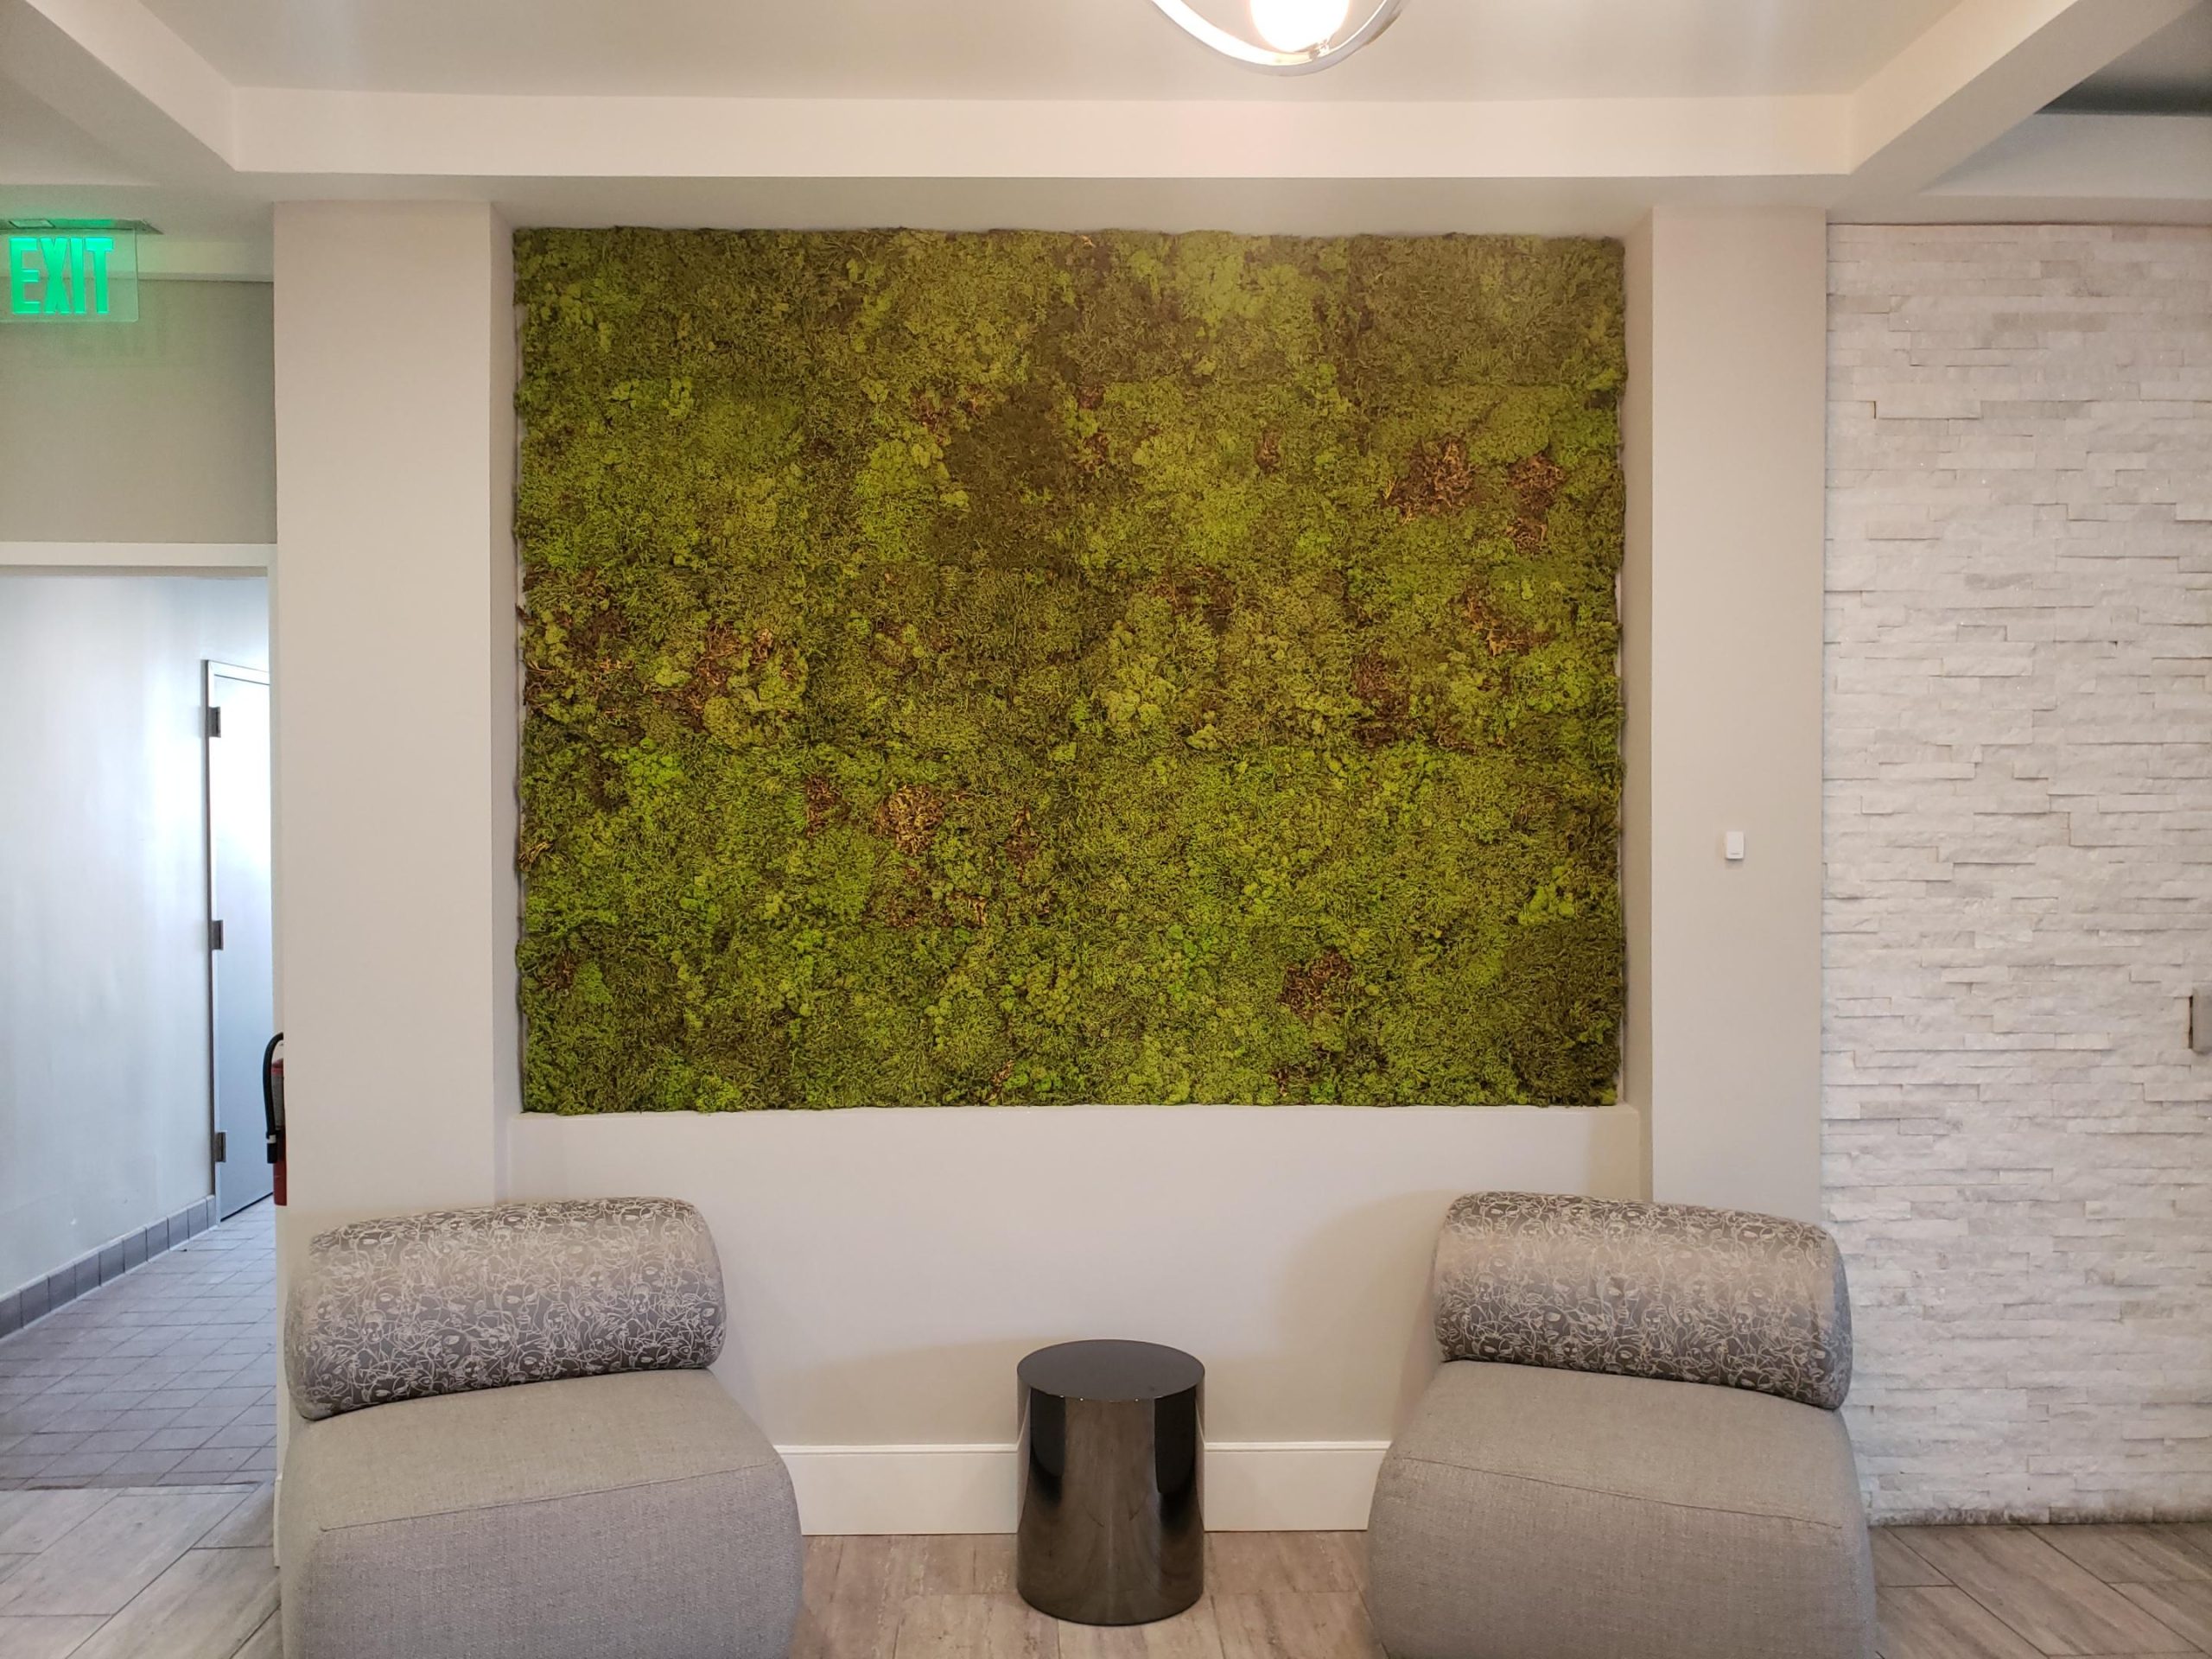 Moss wall installation in Towson, MD